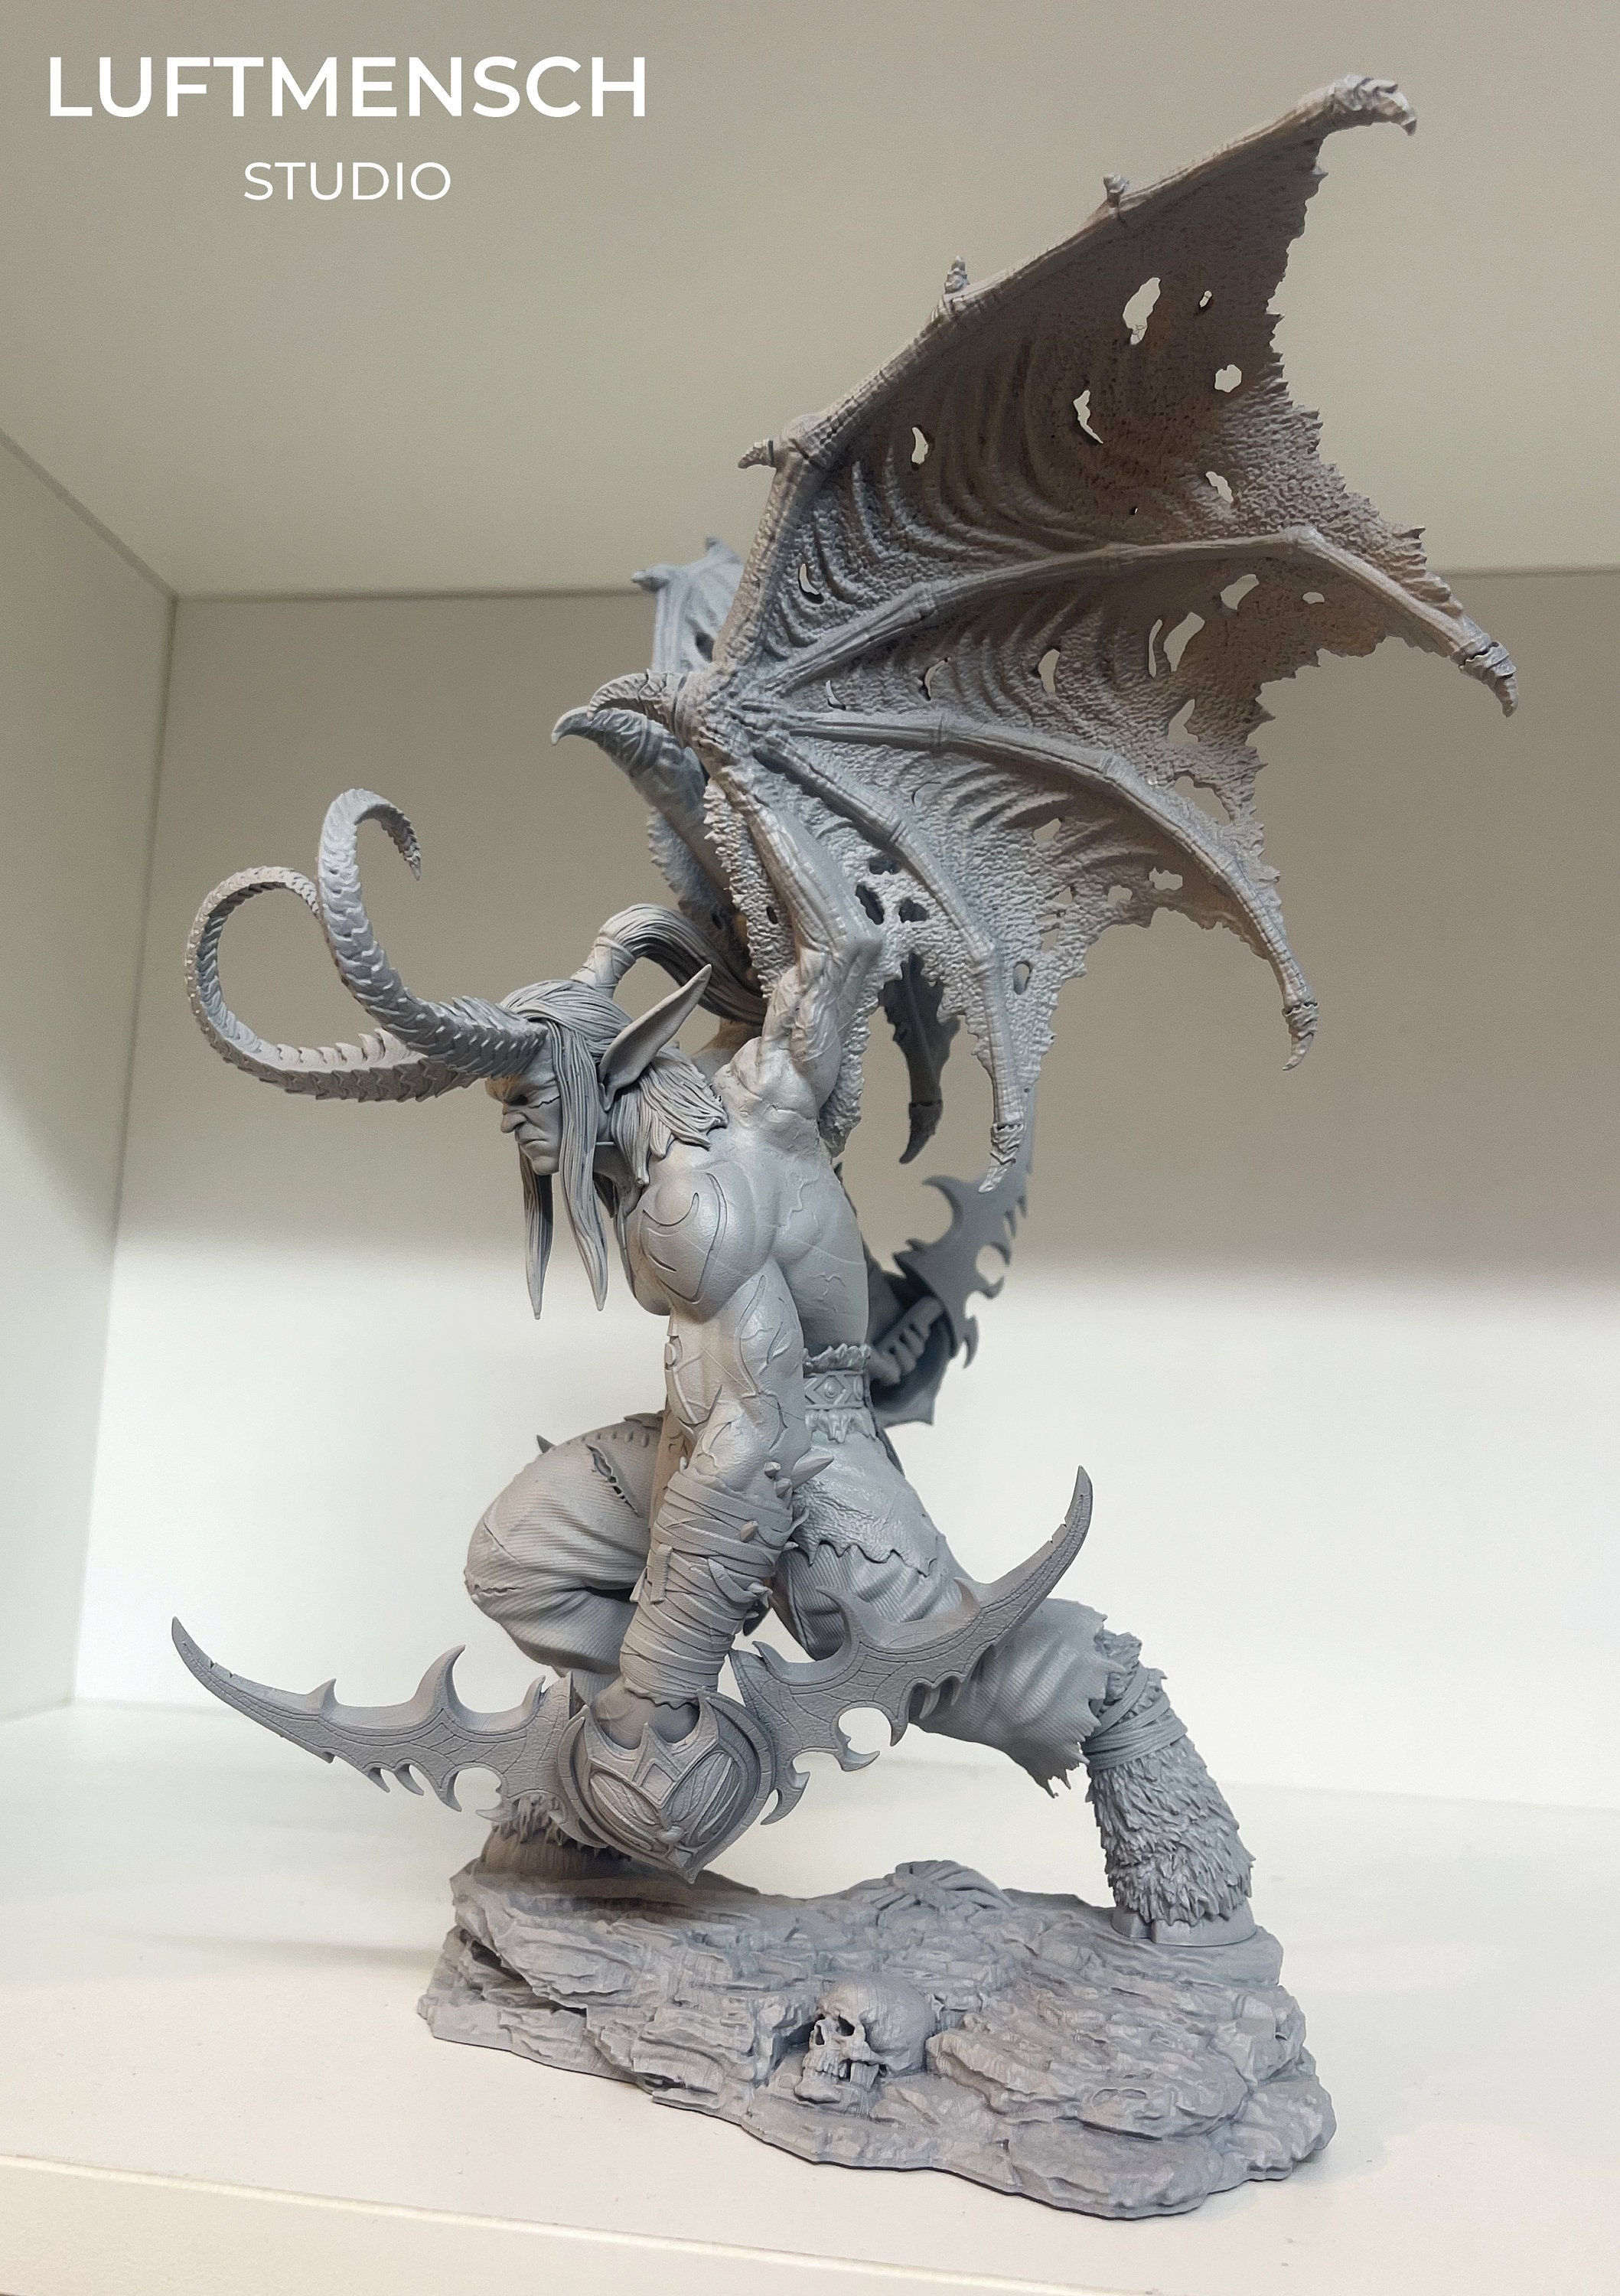 worldwide Free Shipping 3D printed Illidan kit from WOW universe in M/L size 